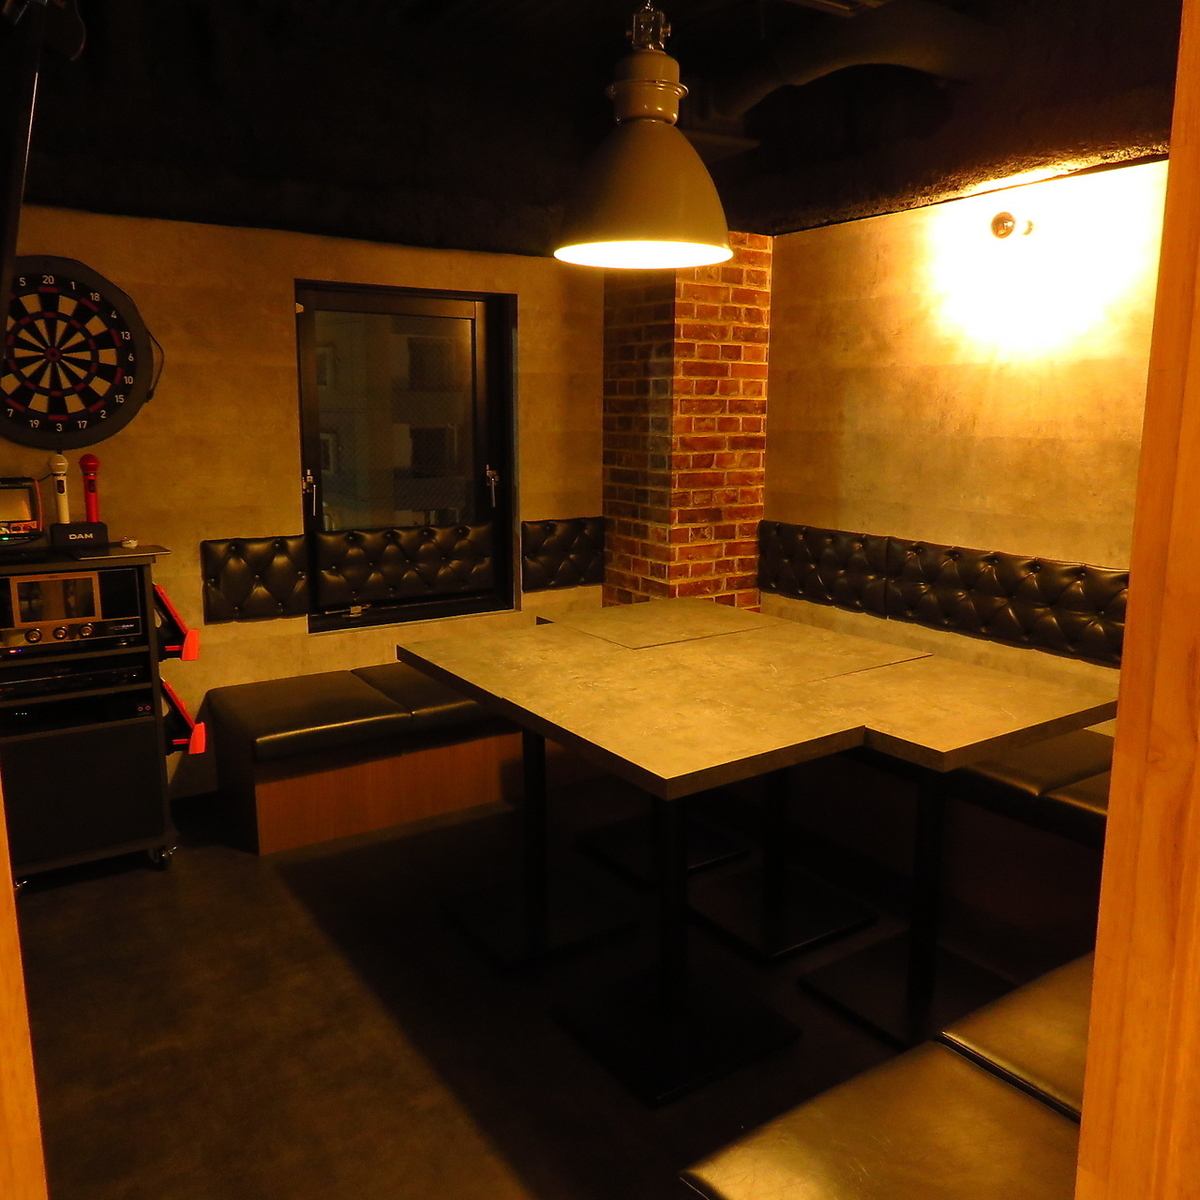 The private room that can be used by about 10 people is recommended for girls-only gatherings and joint parties!